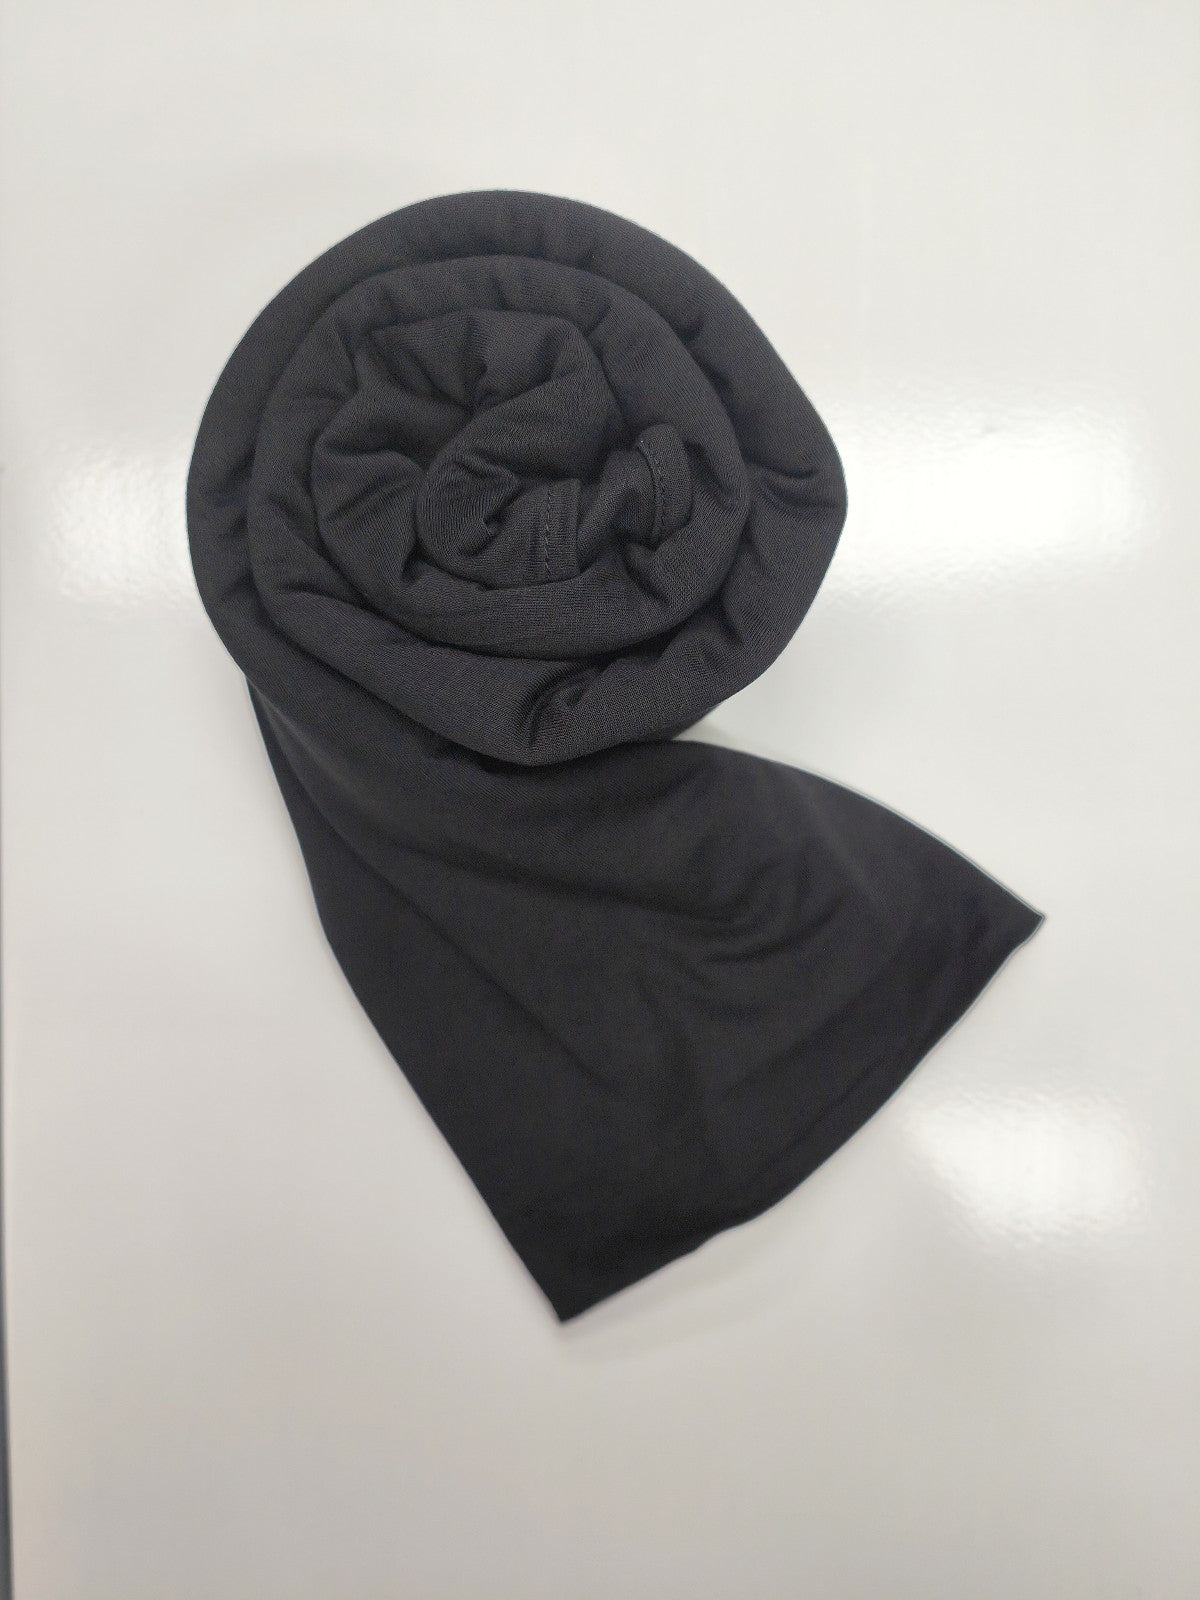 Discover elegance and comfort with our Black Pure Bamboo Hijab, exclusively offered by Hikmah Boutique. This hijab has style, breathability, and eco-friendliness, making it perfect for any occasion. Stay cool and confident with its natural antibacterial and anti-odor properties with Hikmah Boutique's Premium Quality Hijabs.